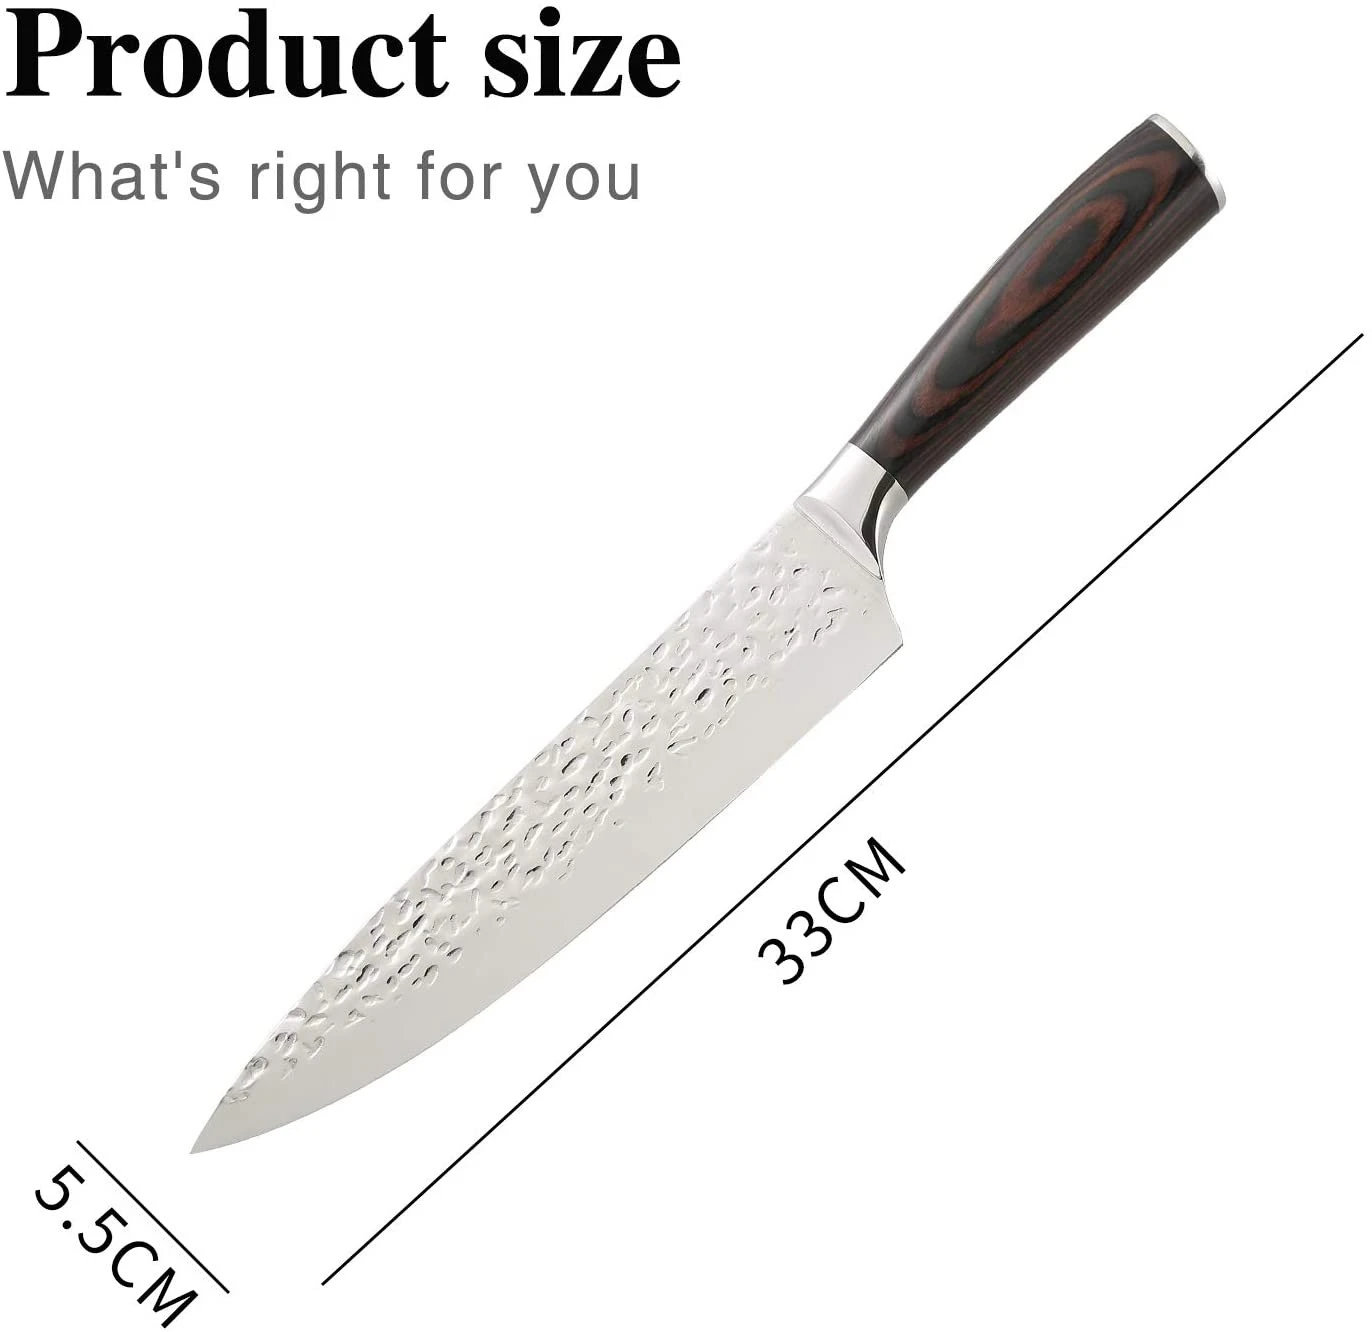 8 Inch kitchen Chefs Knives High Carbon German Stainless Steel Sharp Paring Knife with Handle